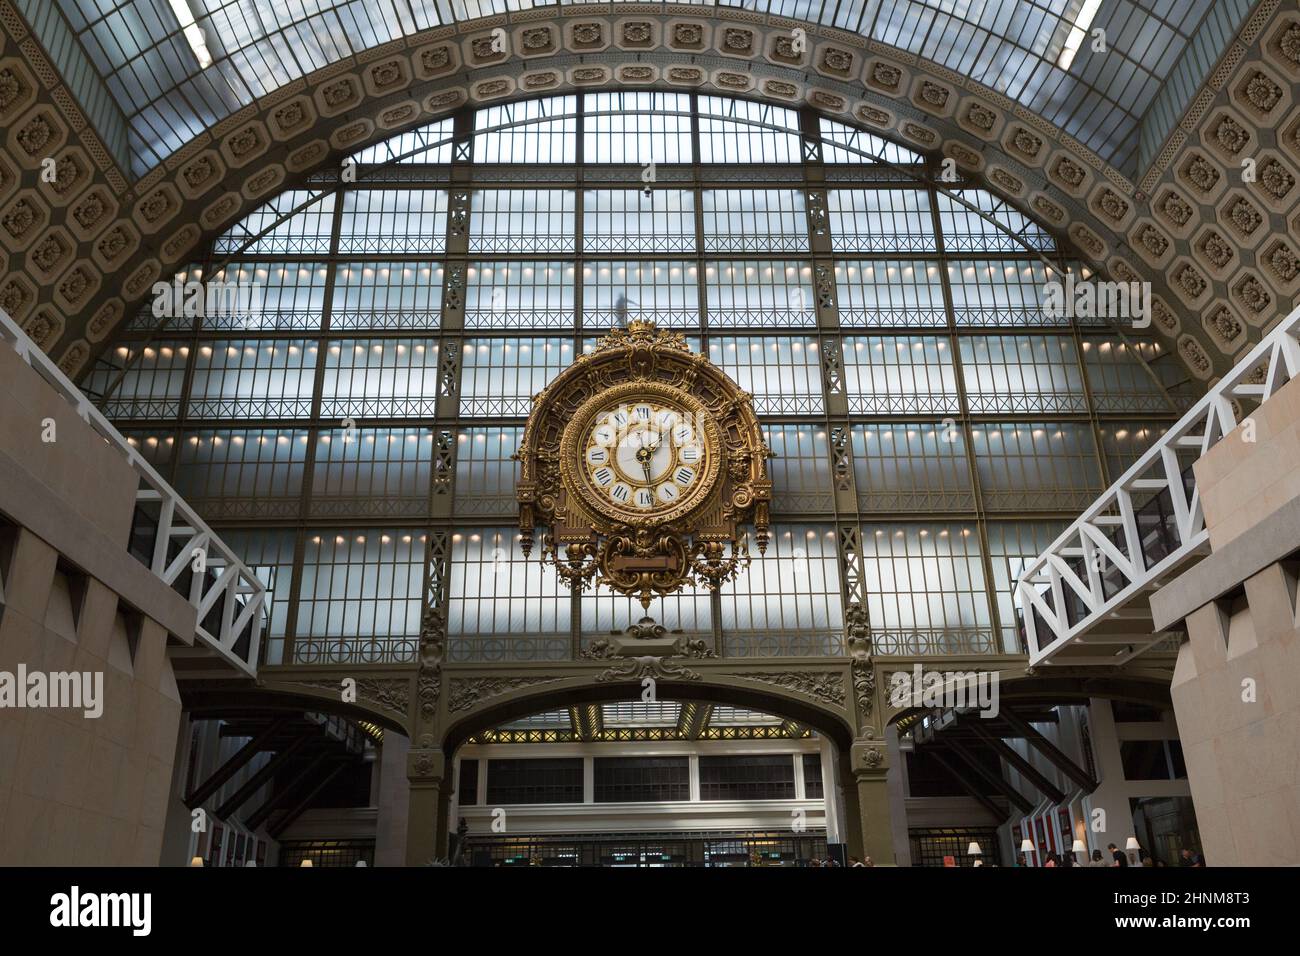 PARIS -SEPTEMBER 7, 2014: Golden clock of the museum D'Orsay in Paris, France. Musee d'Orsay has the largest collection of impressionist and post-impressionist paintings in the world. Stock Photo